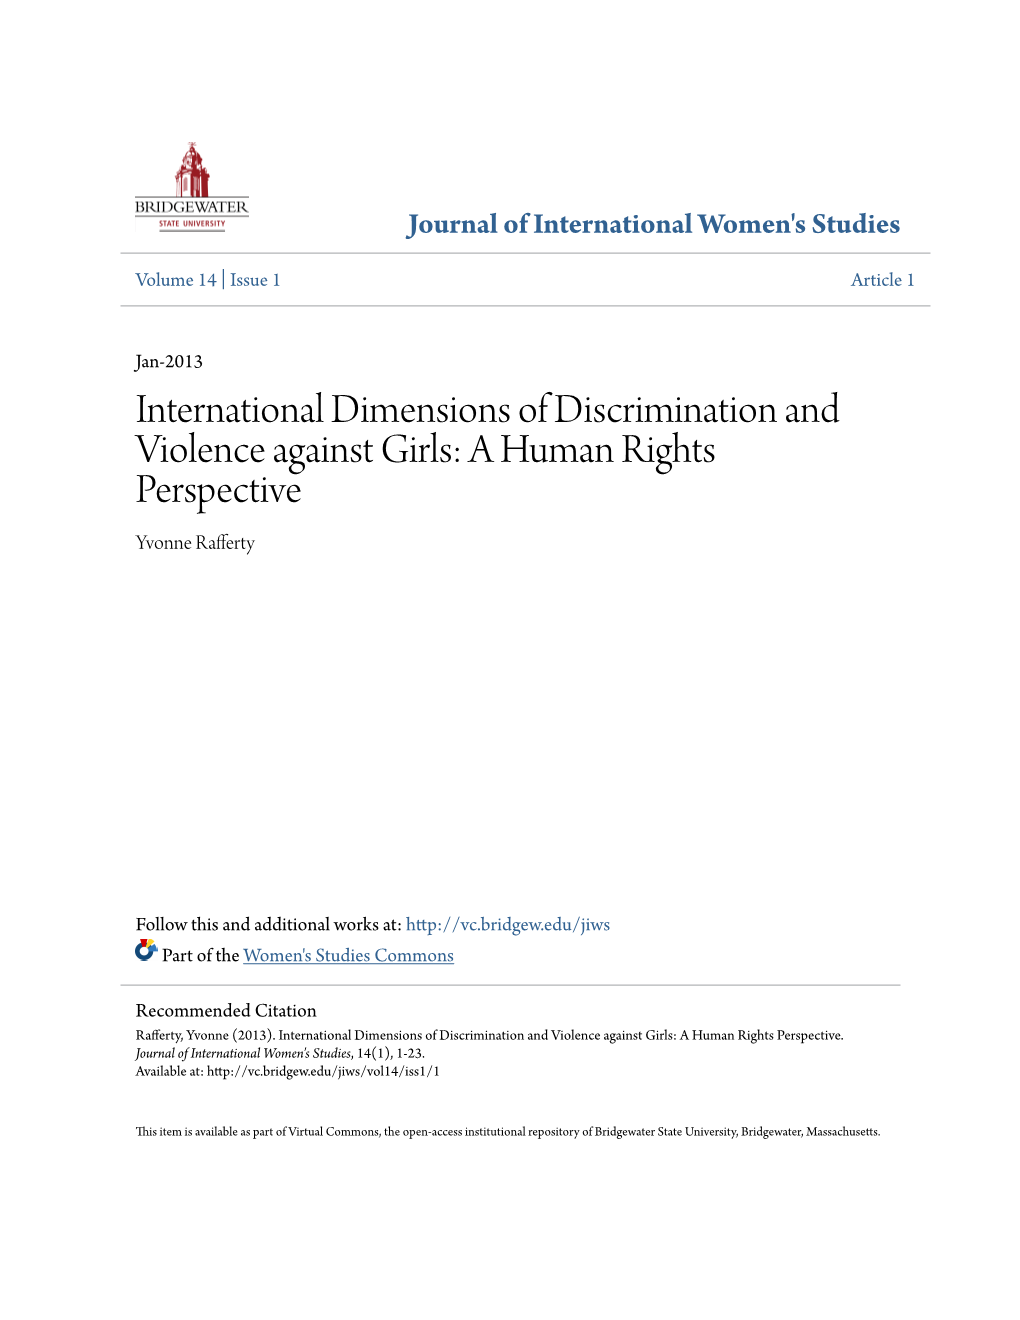 International Dimensions of Discrimination and Violence Against Girls: a Human Rights Perspective Yvonne Rafferty